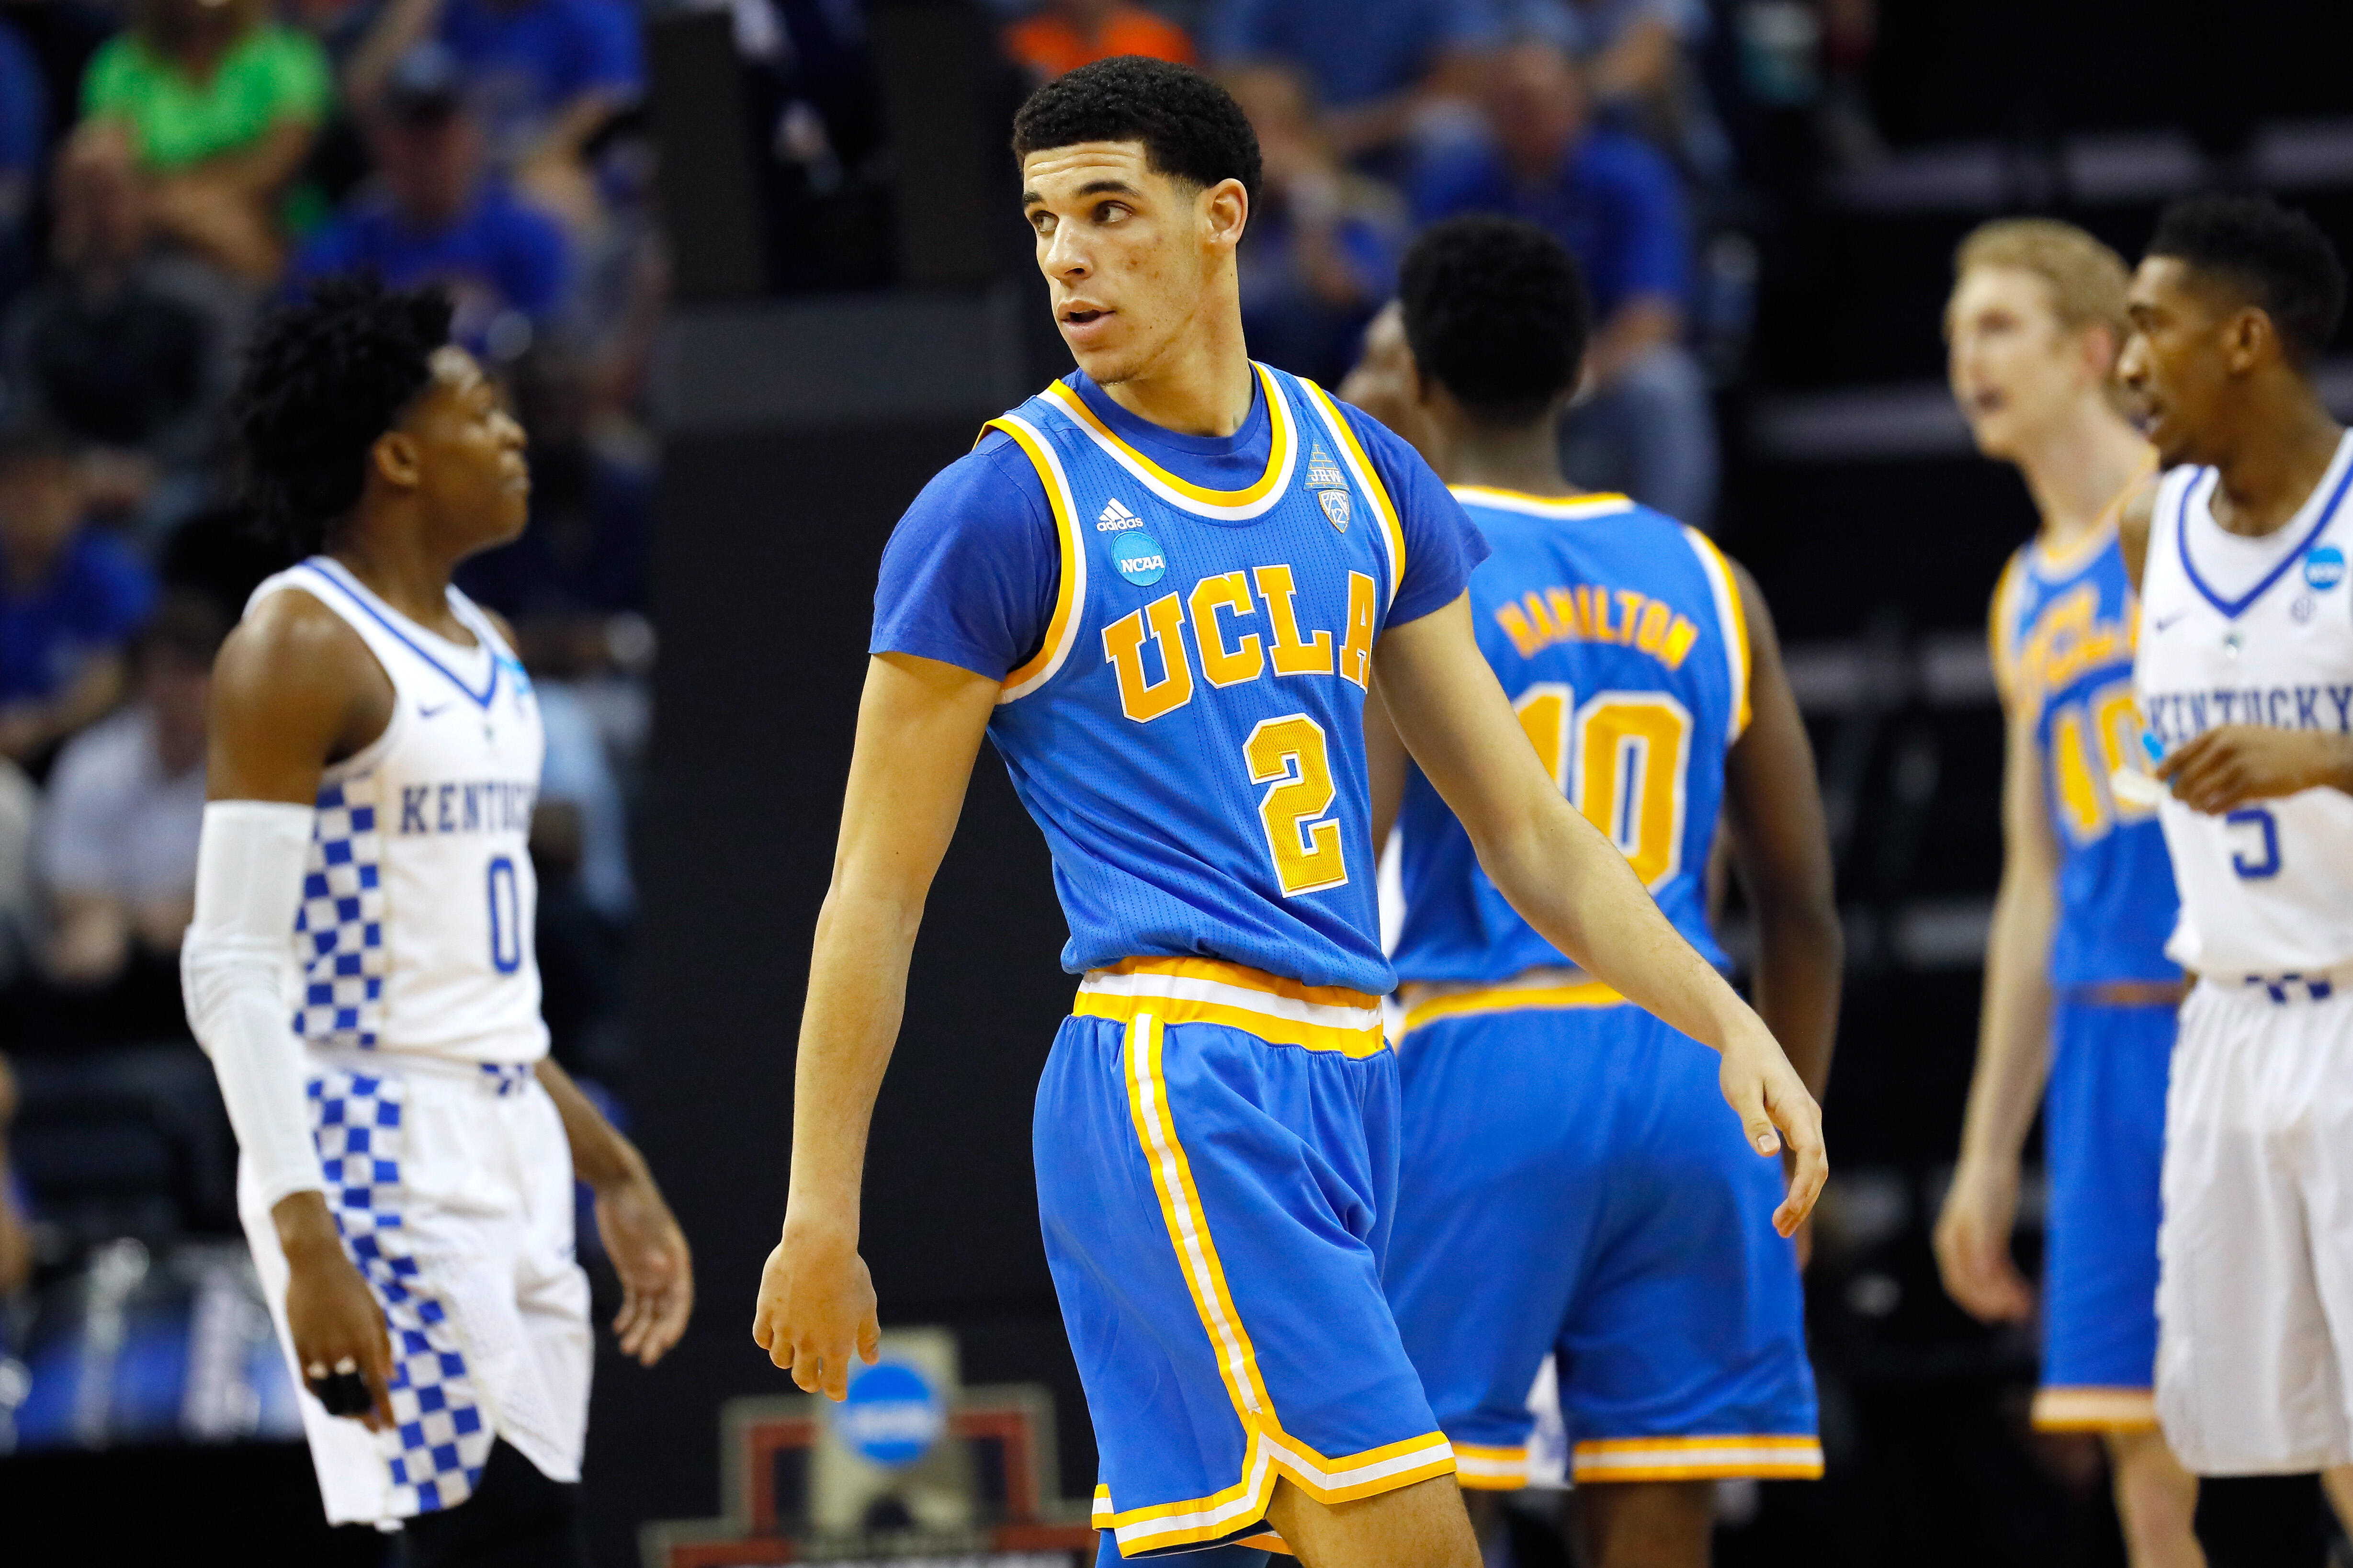 MEMPHIS, TN - MARCH 24: Lonzo Ball #2 of the UCLA Bruins looks on in the first half against the Kentucky Wildcats during the 2017 NCAA Men's Basketball Tournament South Regional at FedExForum on March 24, 2017 in Memphis, Tennessee.  (Photo by Kevin C. Co